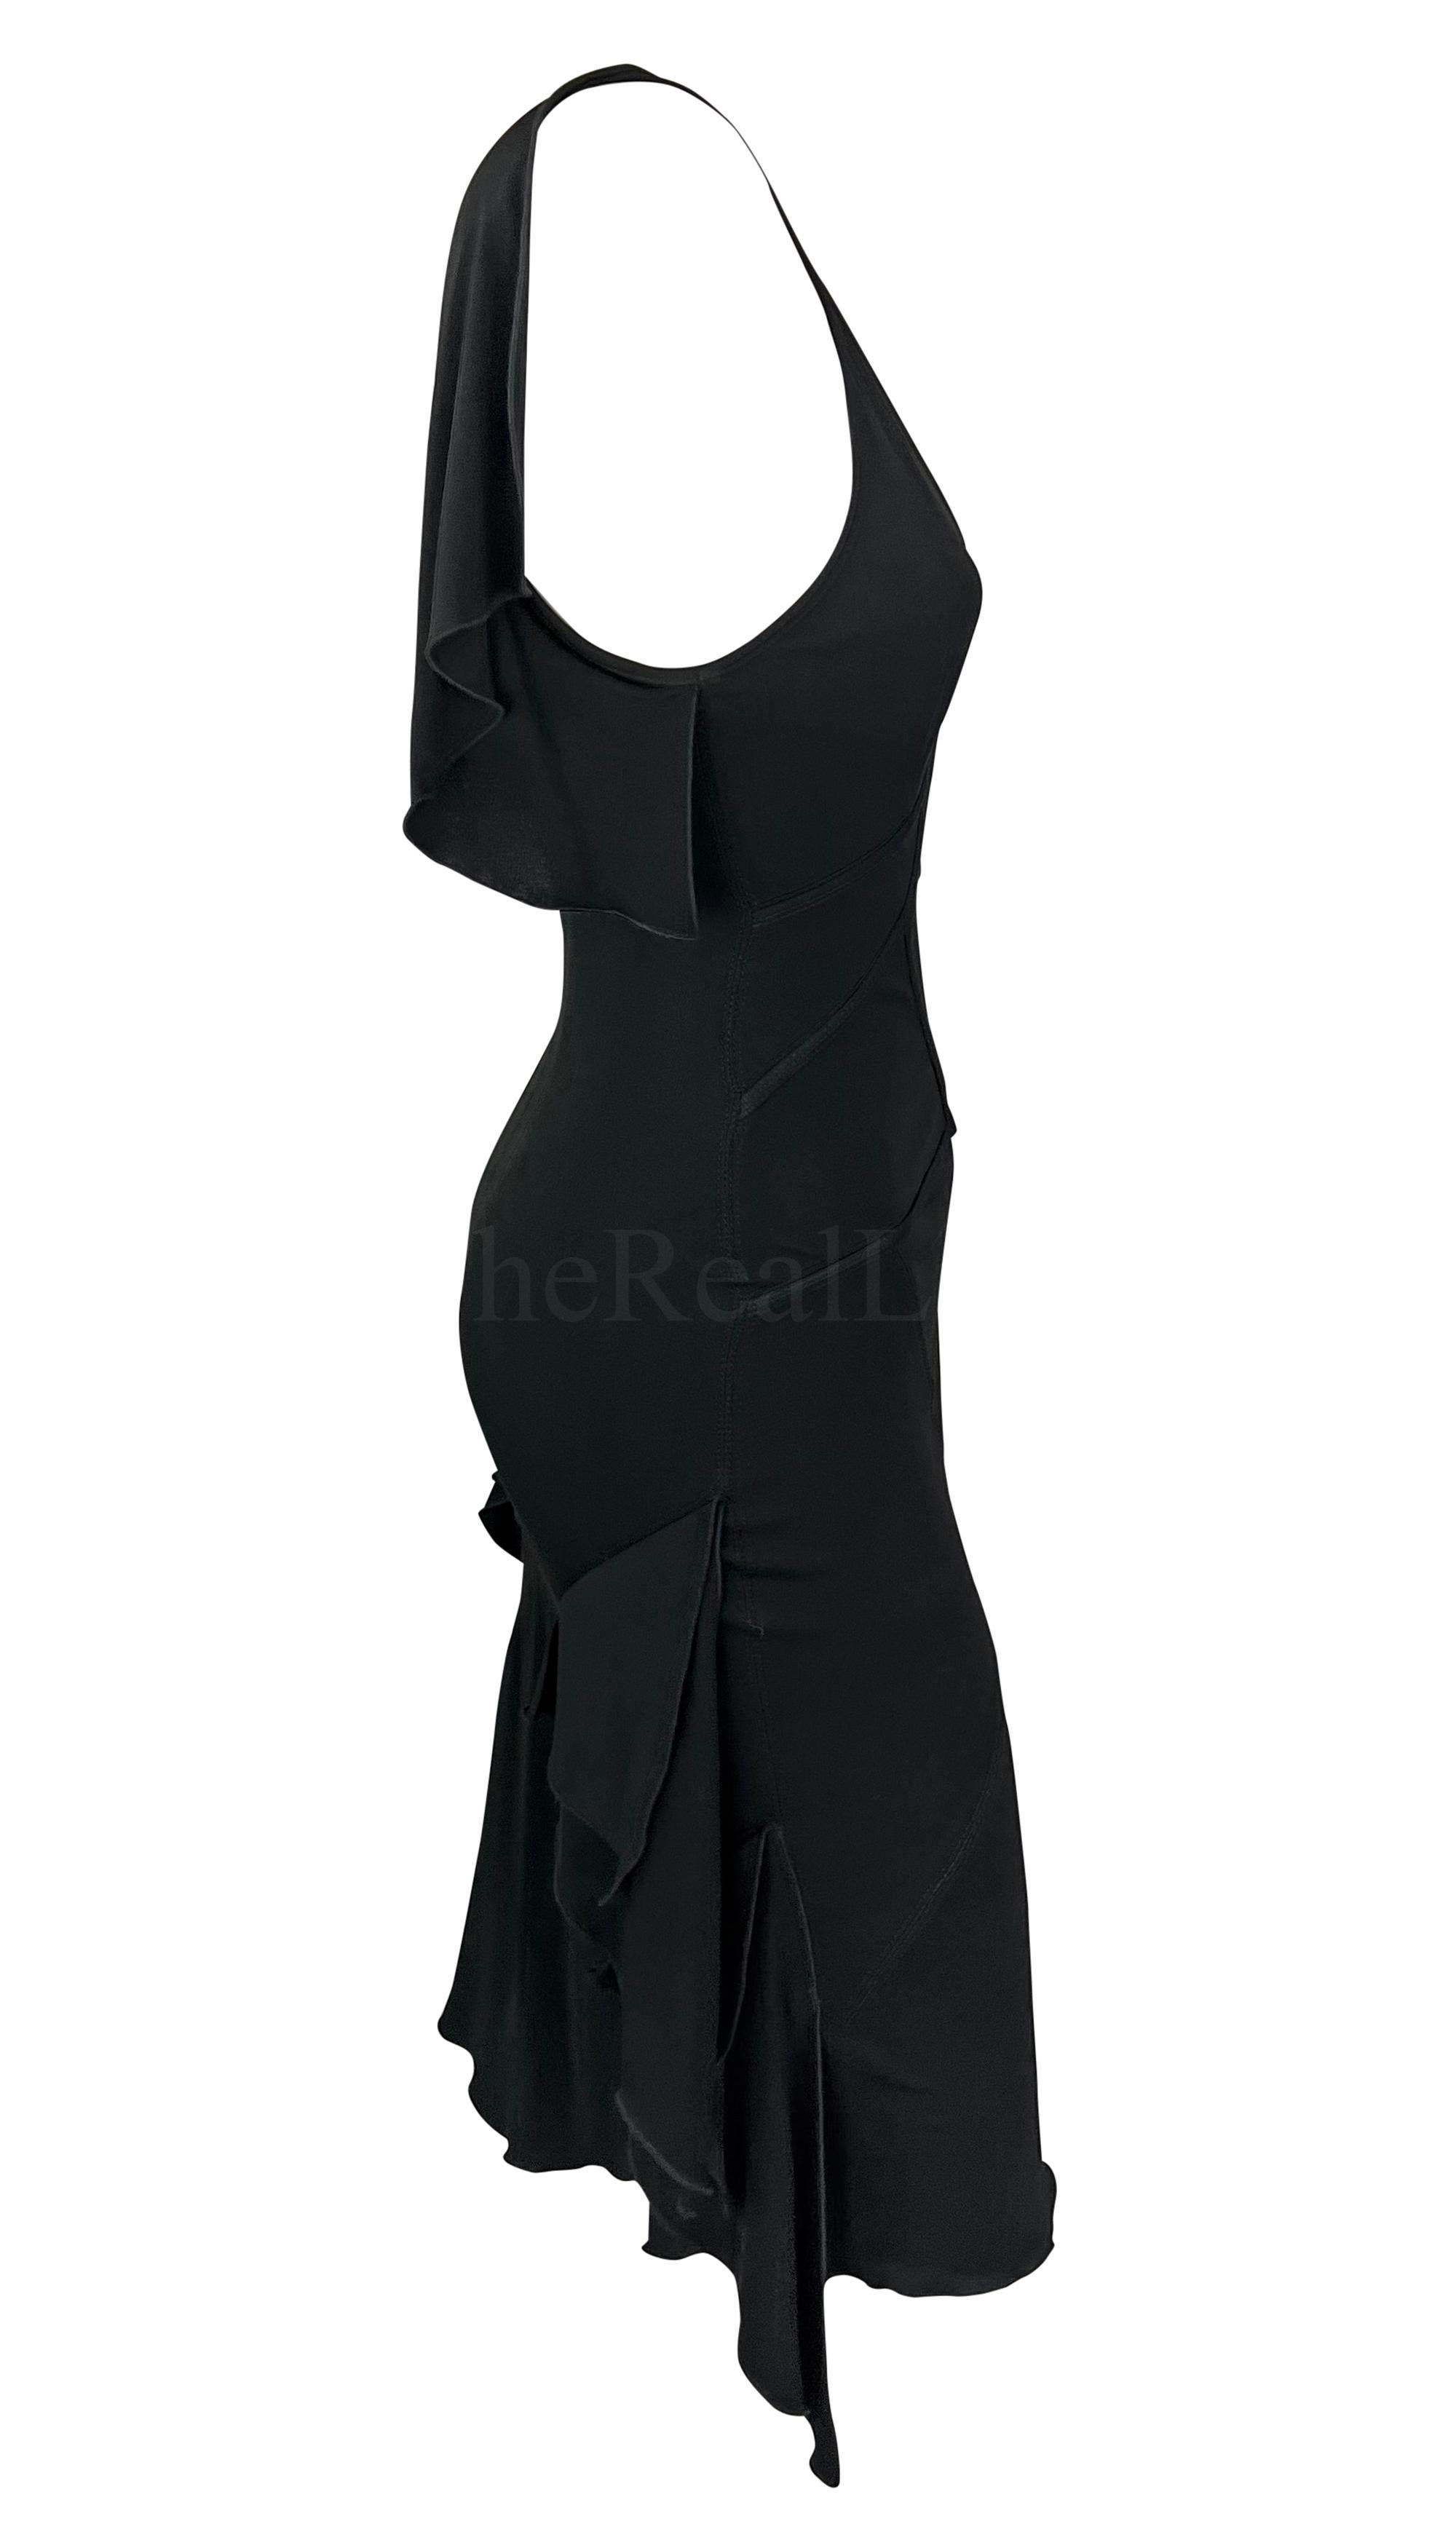 2003 Gucci by Tom Ford Black Plunge Ruffle Dress Sleeveless For Sale 2